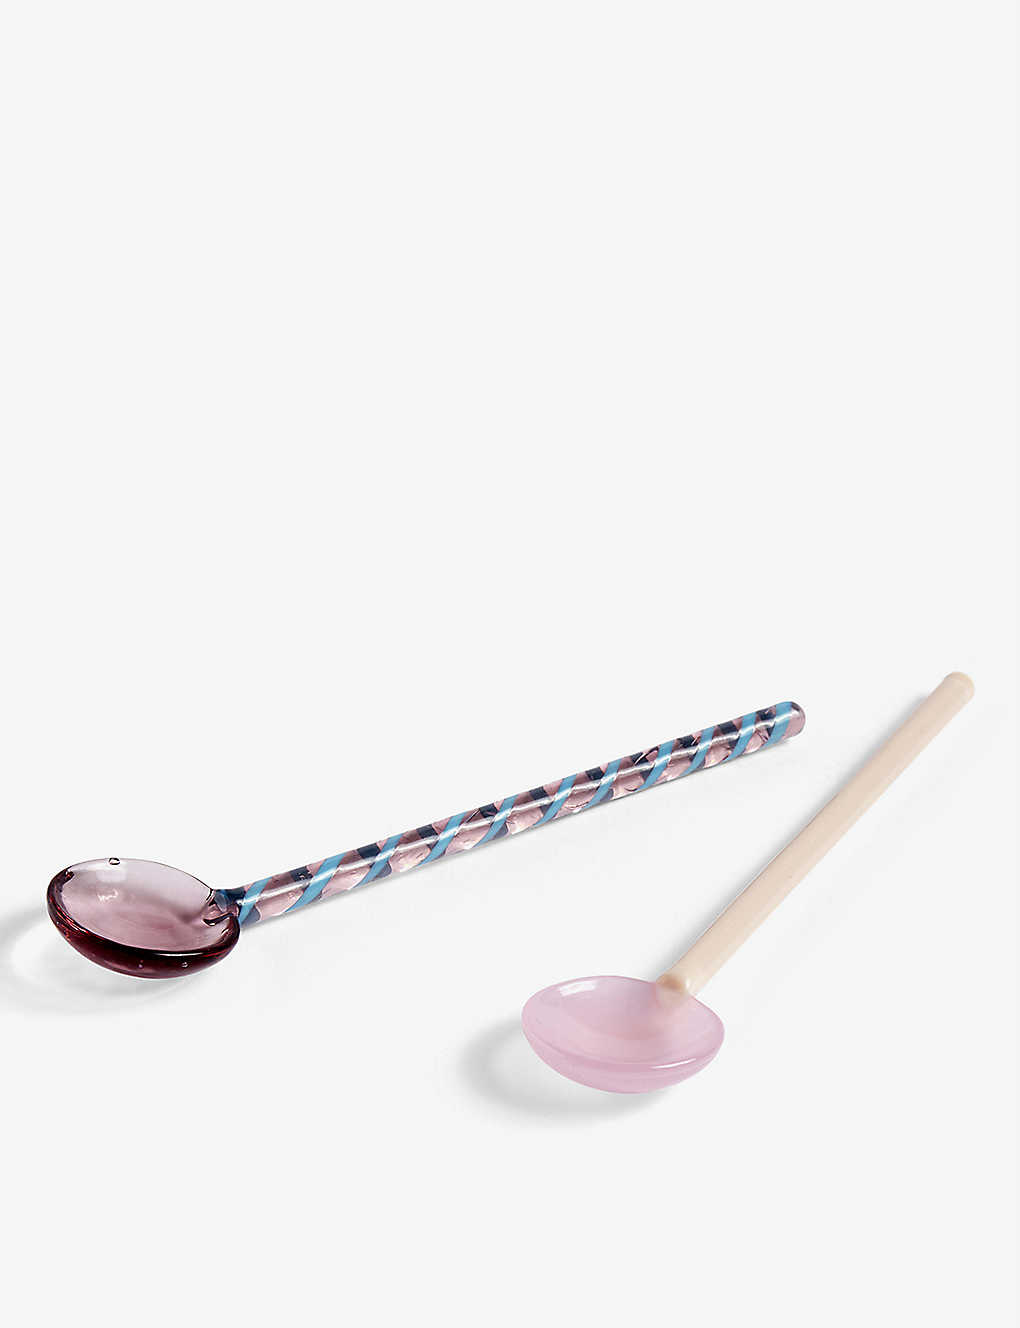 Hay Glass Spoons Round Set Of Two In Aubergine And Light Pink